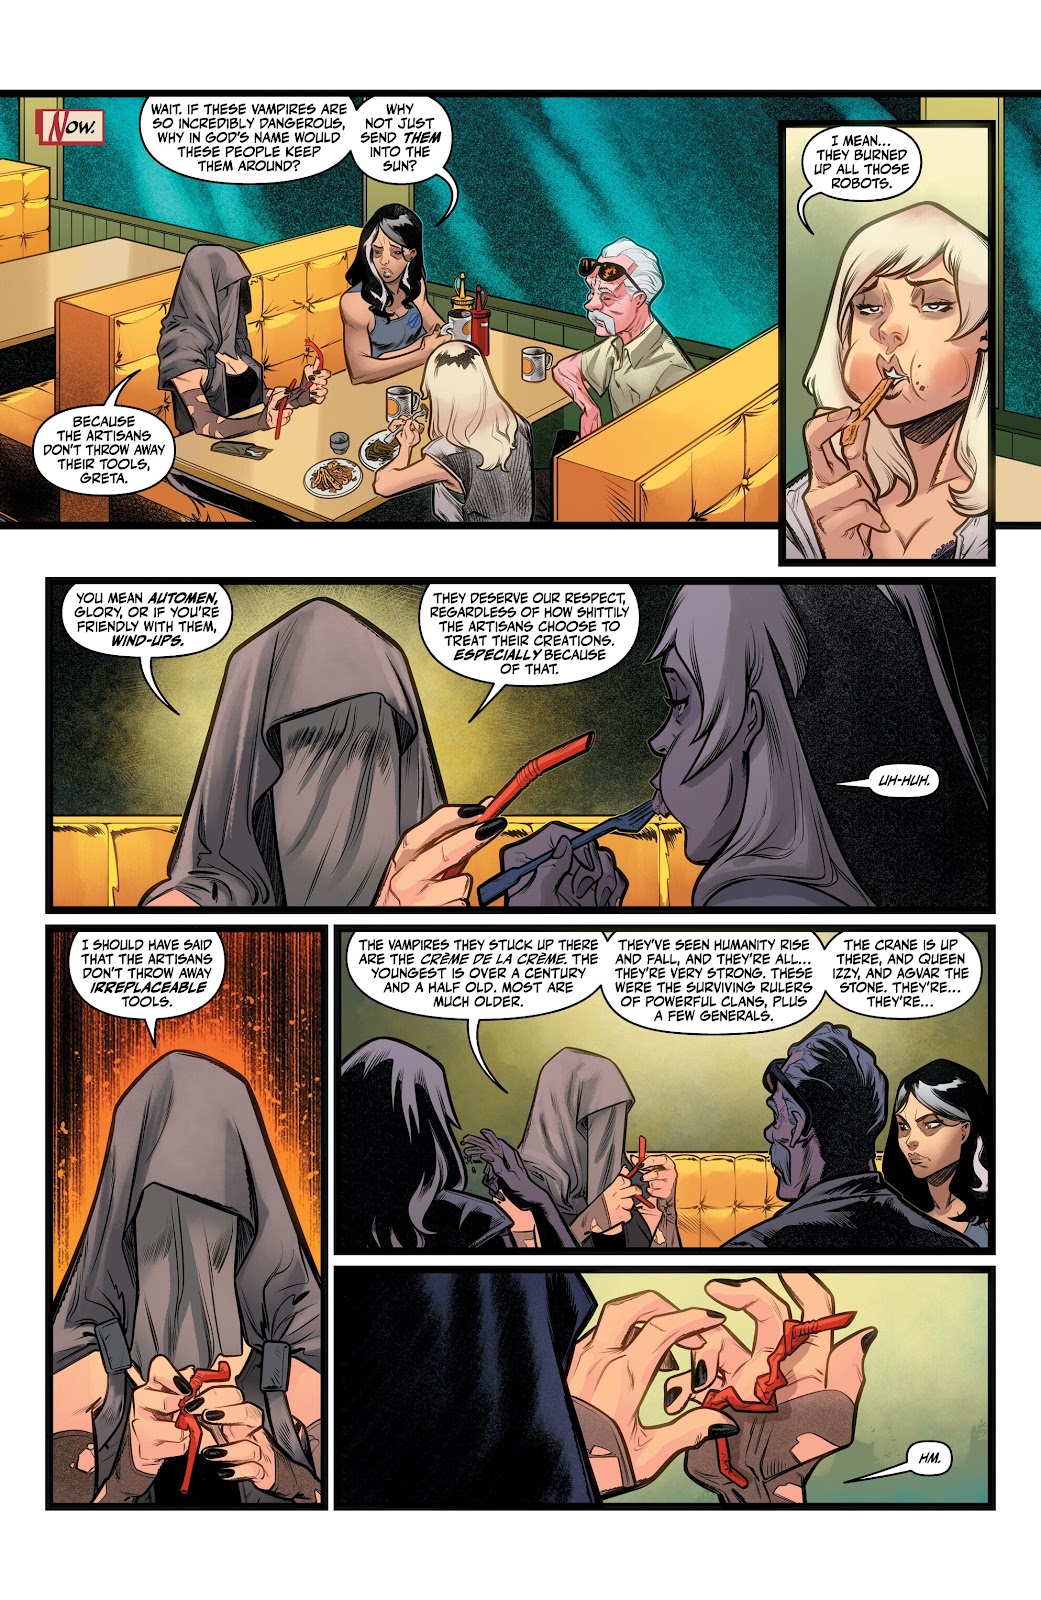 The Bloody Dozen: A Tale of the Shrouded College issue 2 - Page 8